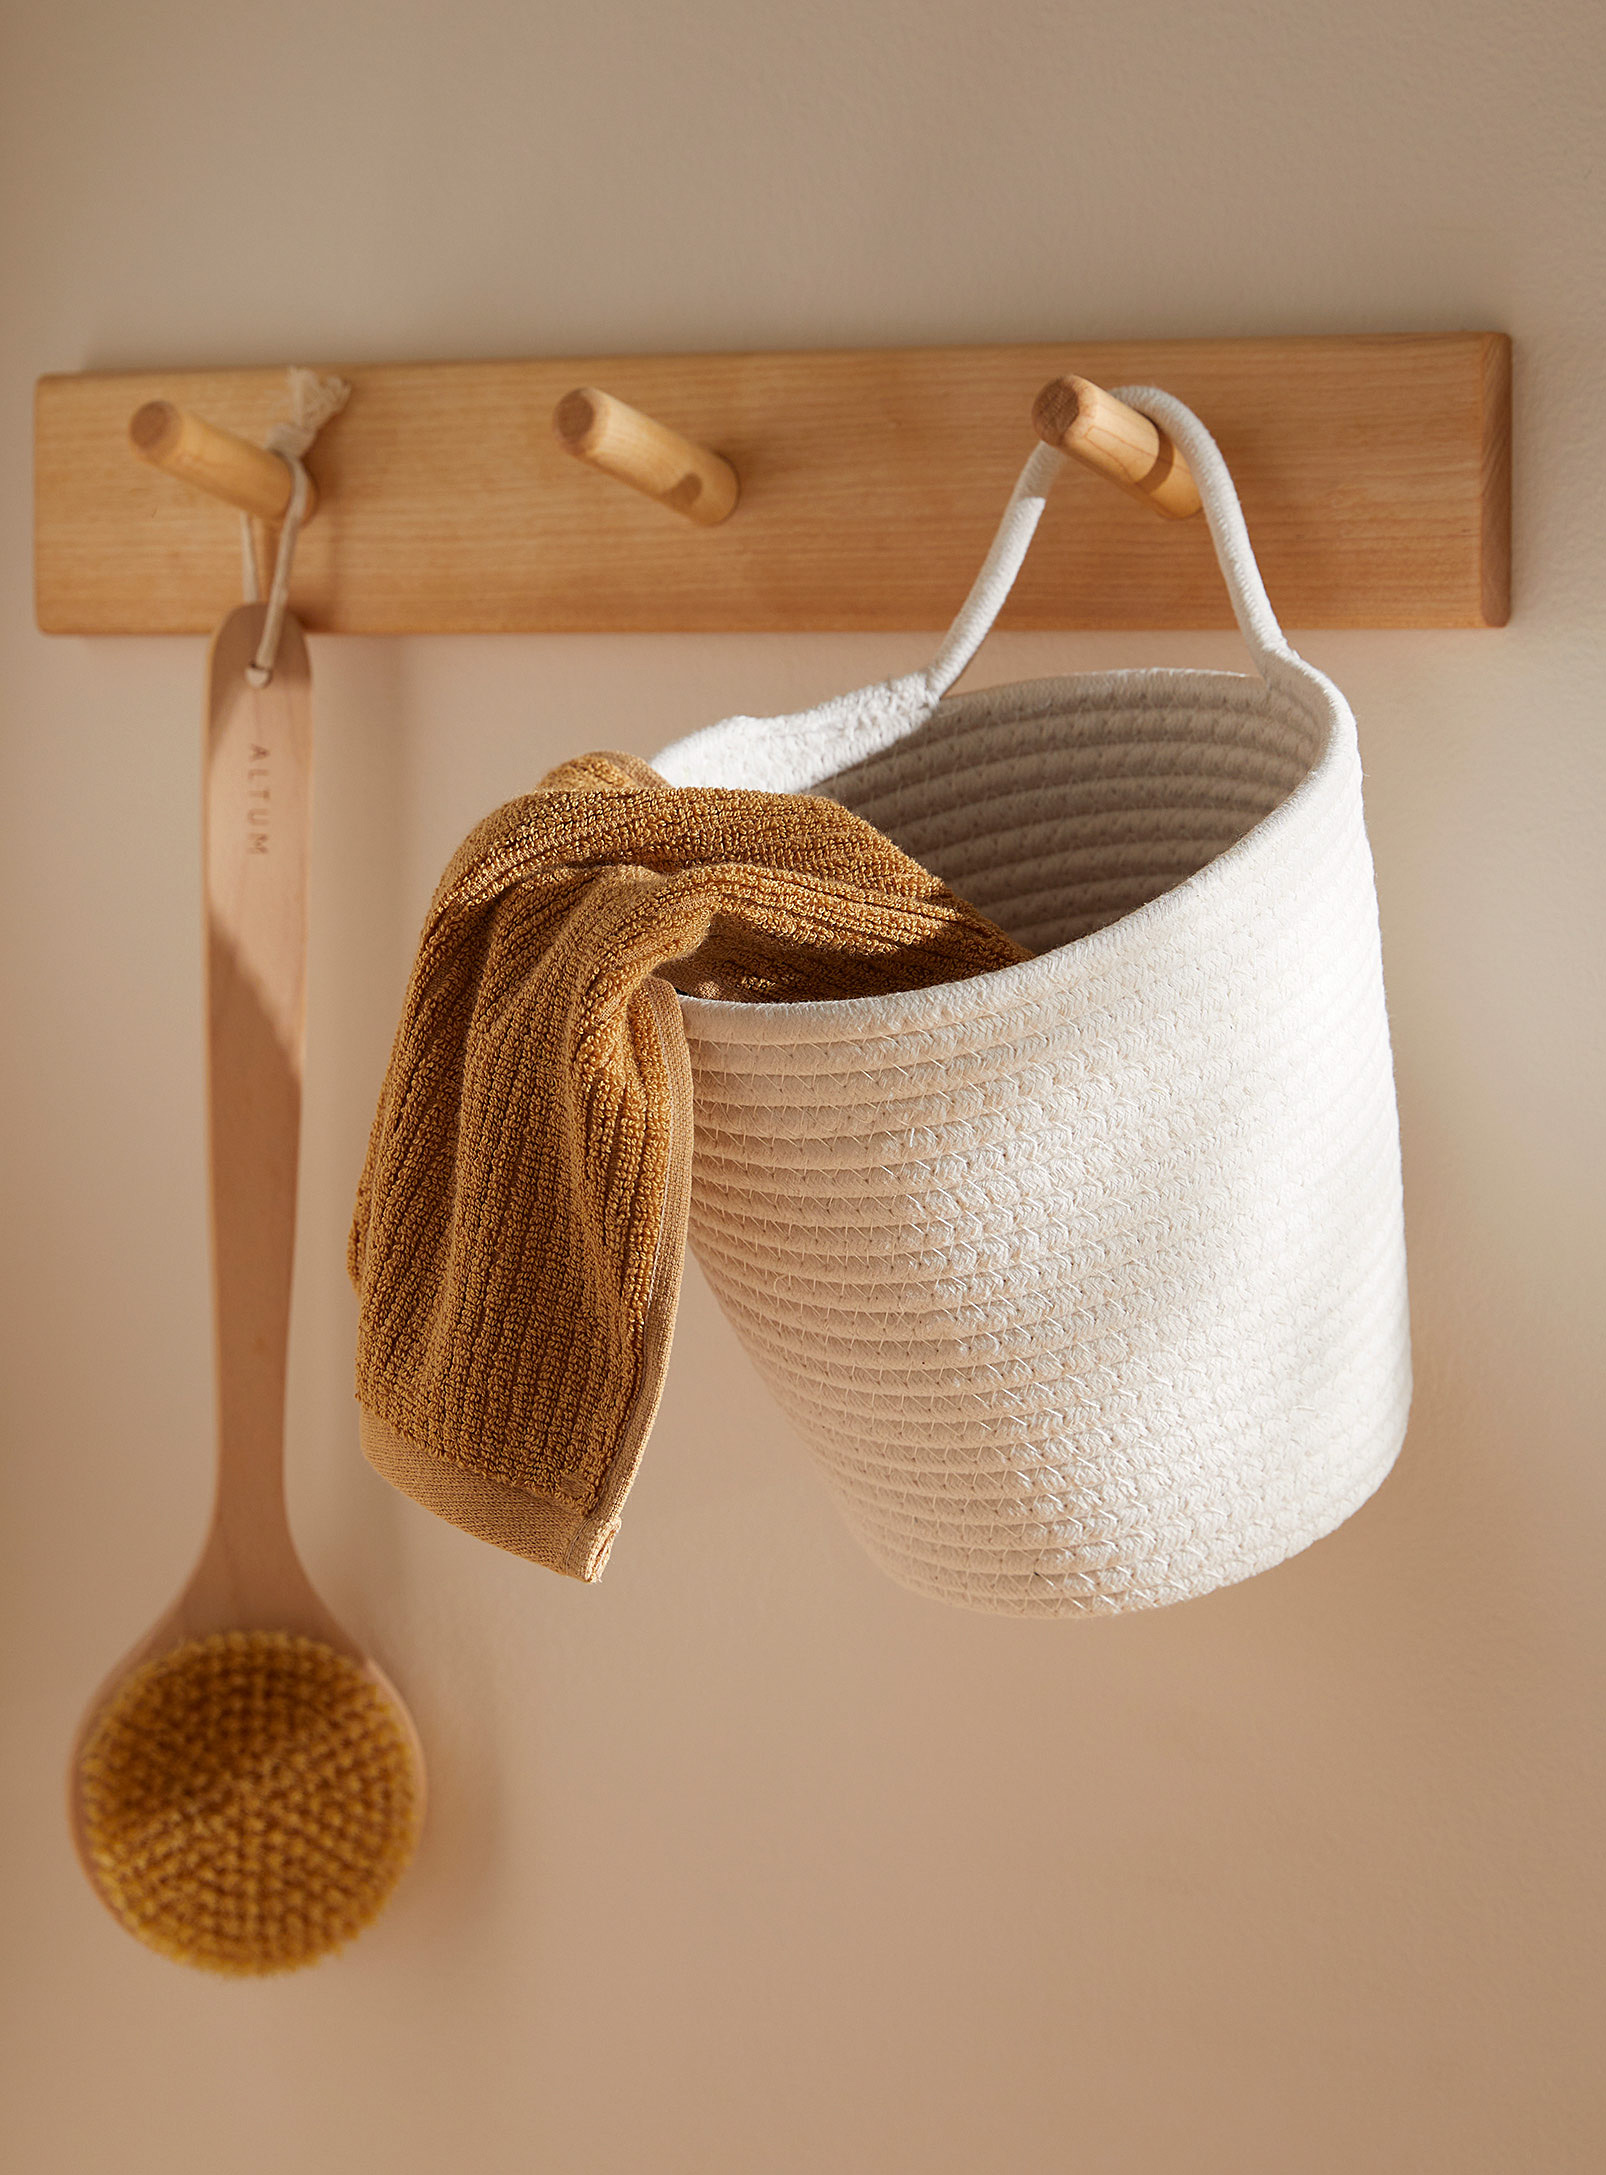 Simons Maison - Rolled rope wall basket